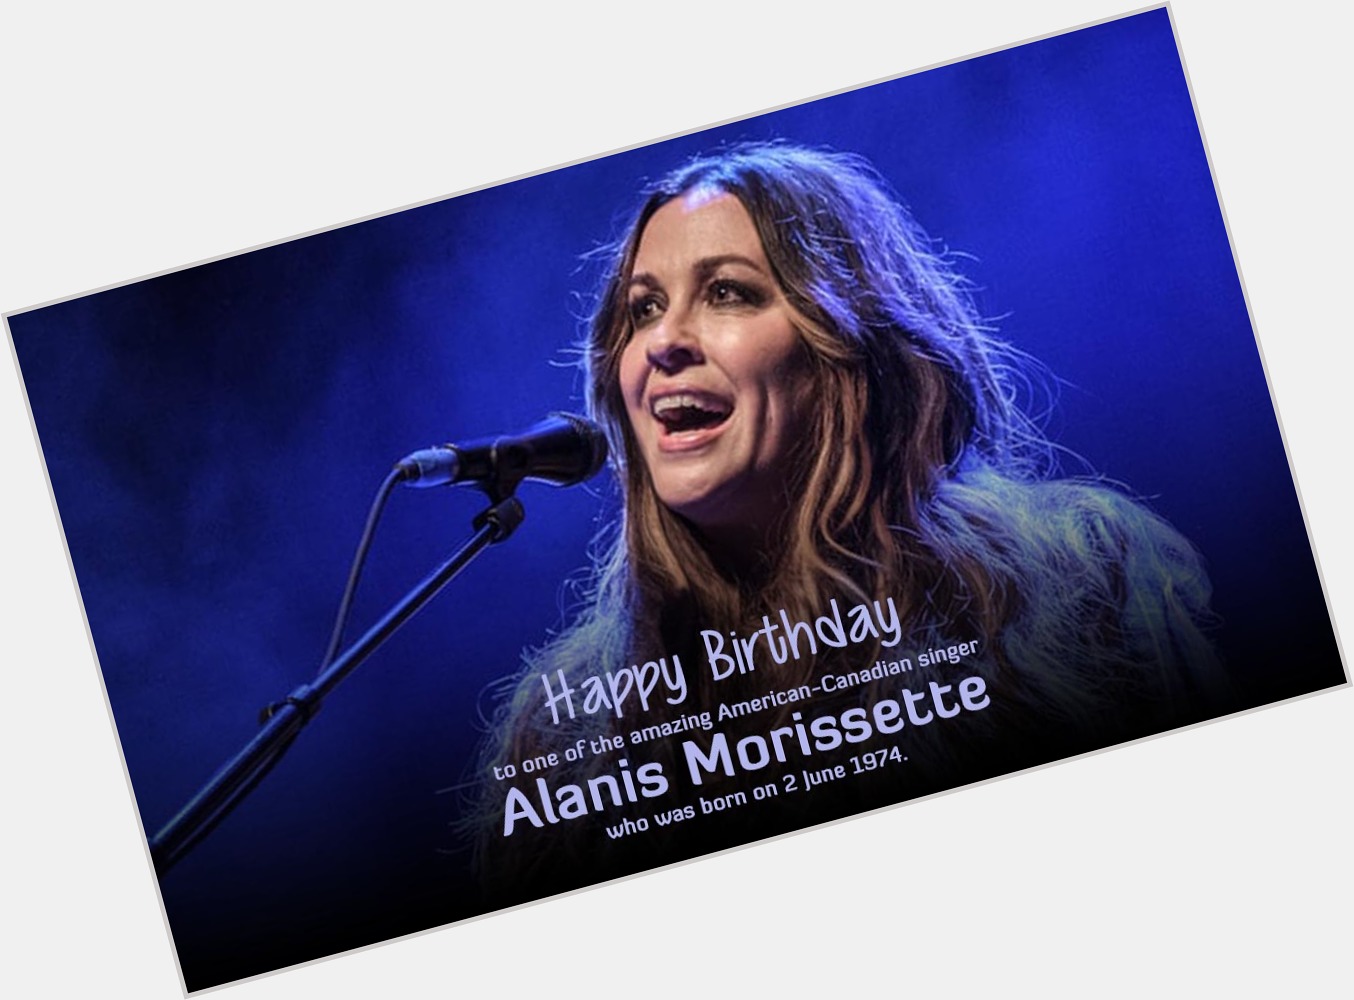 Happy Birthday to one of the amazing American-Canadian singer Alanis Morissette, who was born on 2 June 1974. 